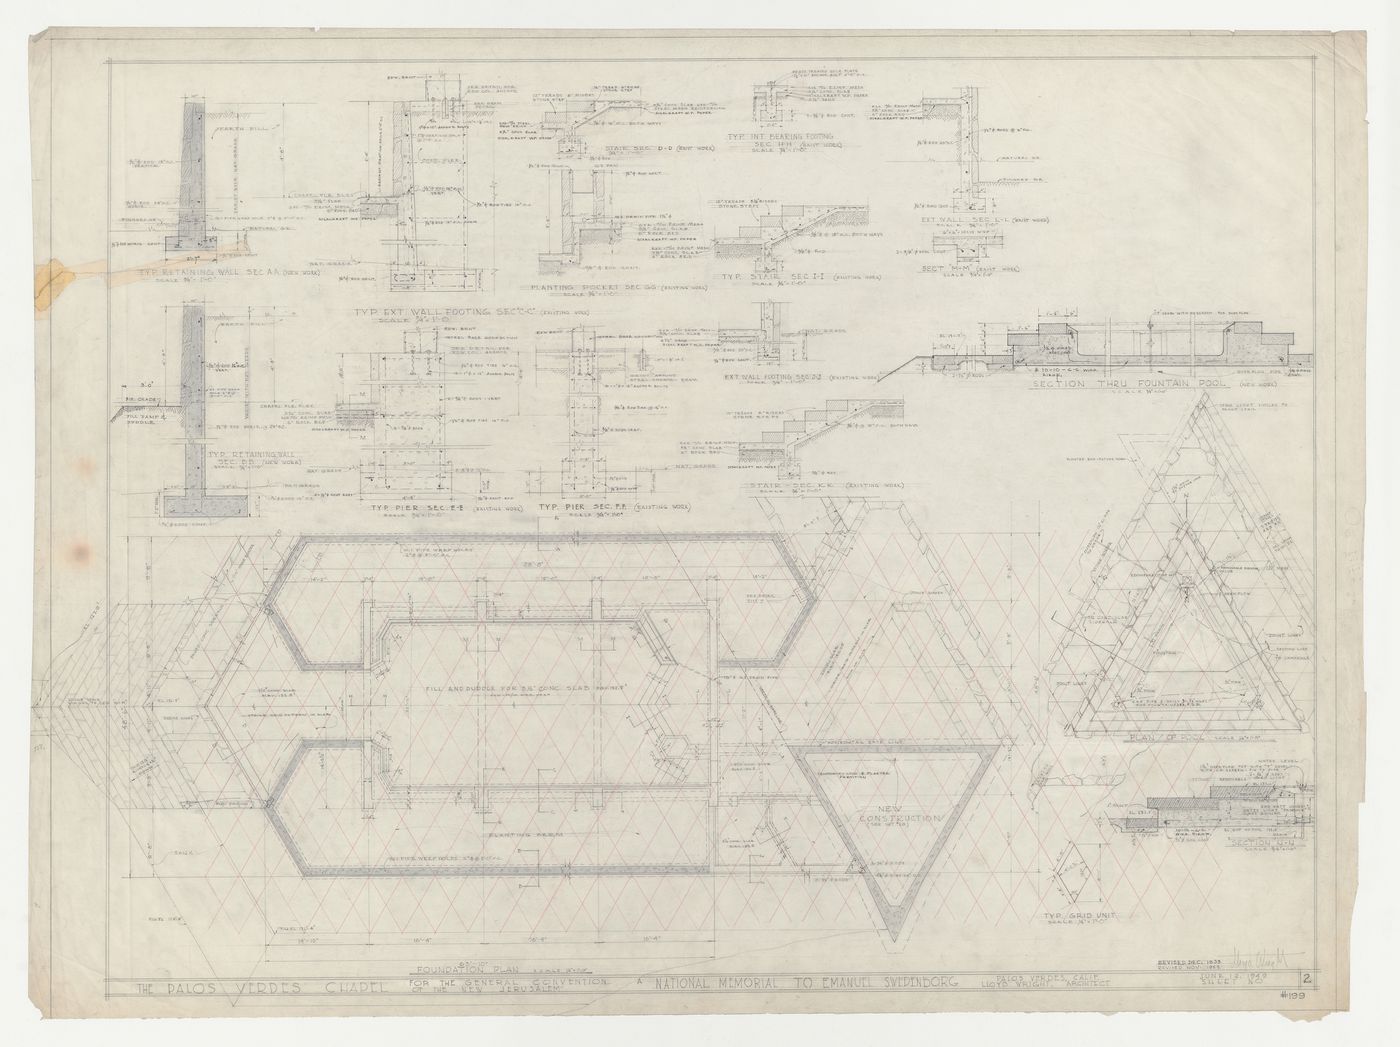 Wayfarers' Chapel, Palos Verdes, California: Foundation plans for chapel, campanile and pool developed on an equilateral parallelogram grid, with sections showing concrete work